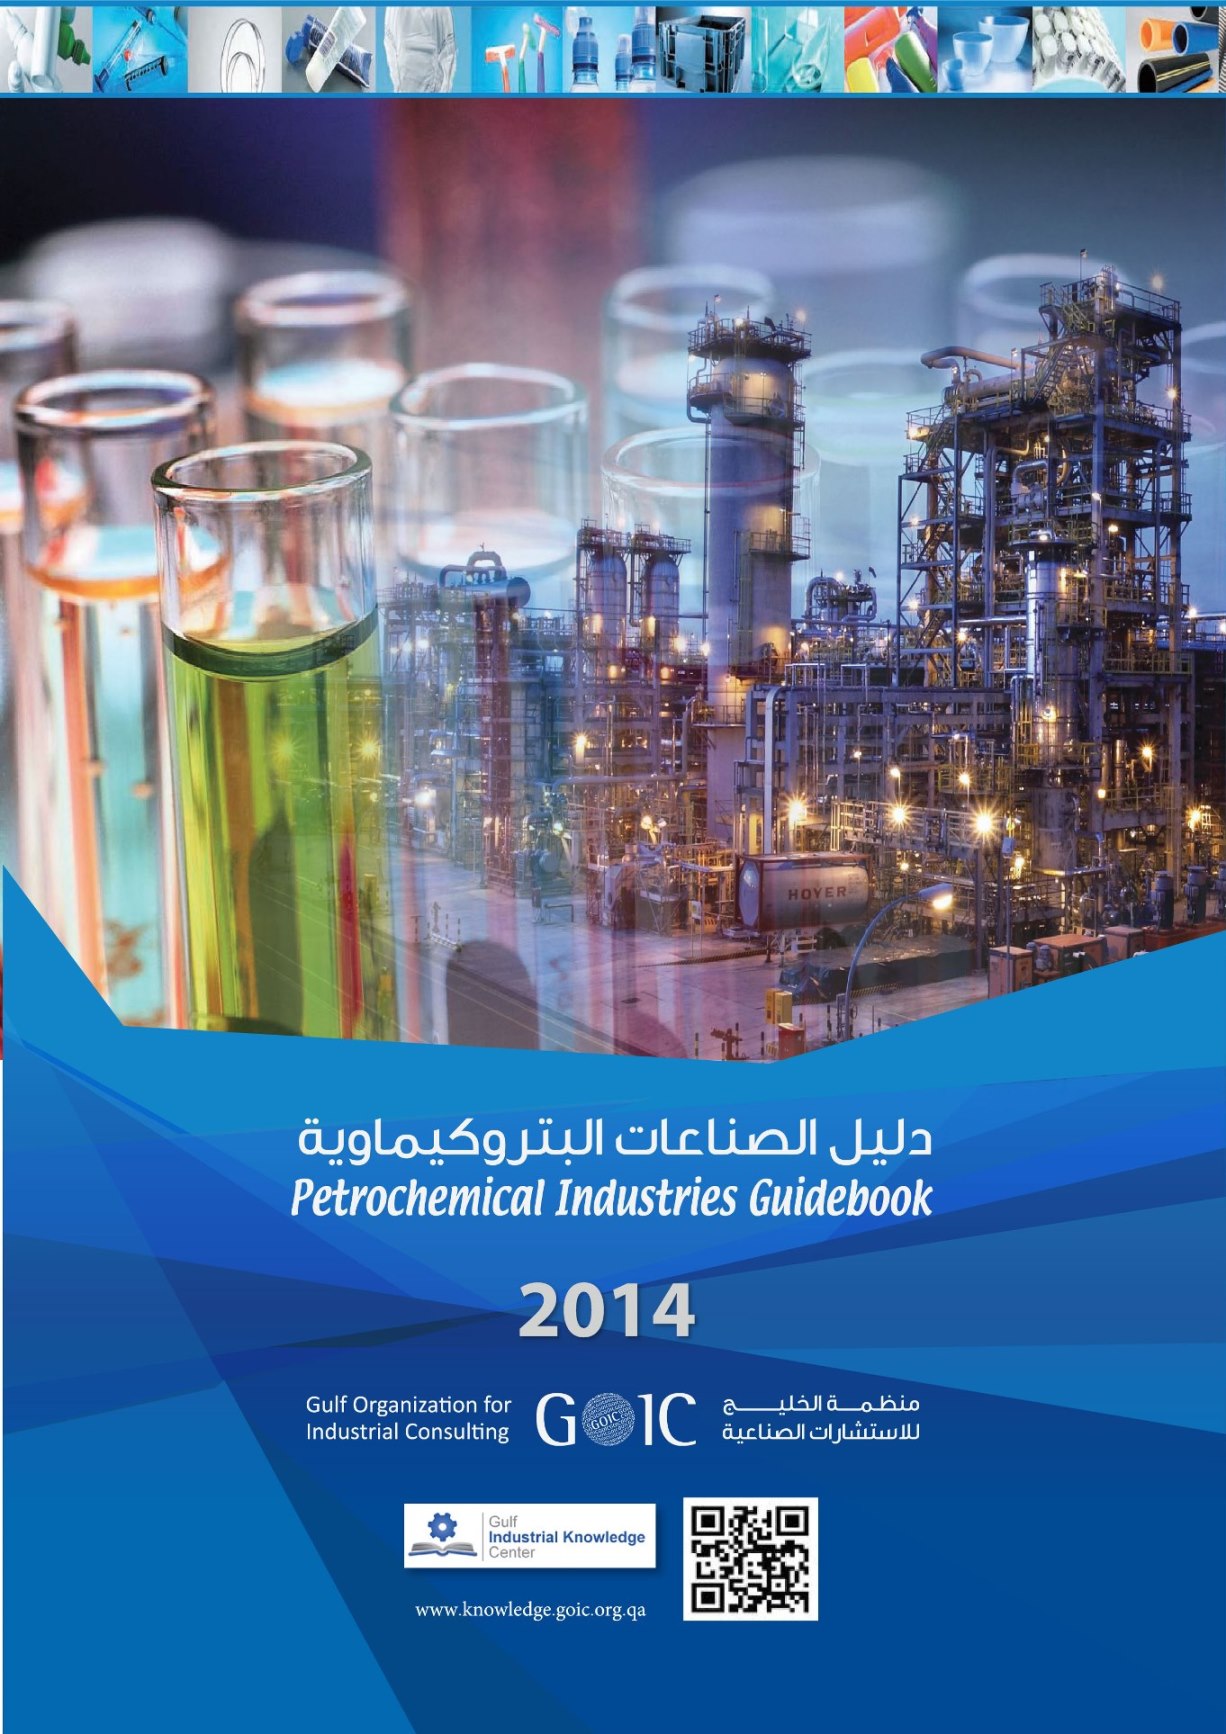 GOIC publishes the GCC Petrochemicals Industries’ Guide 